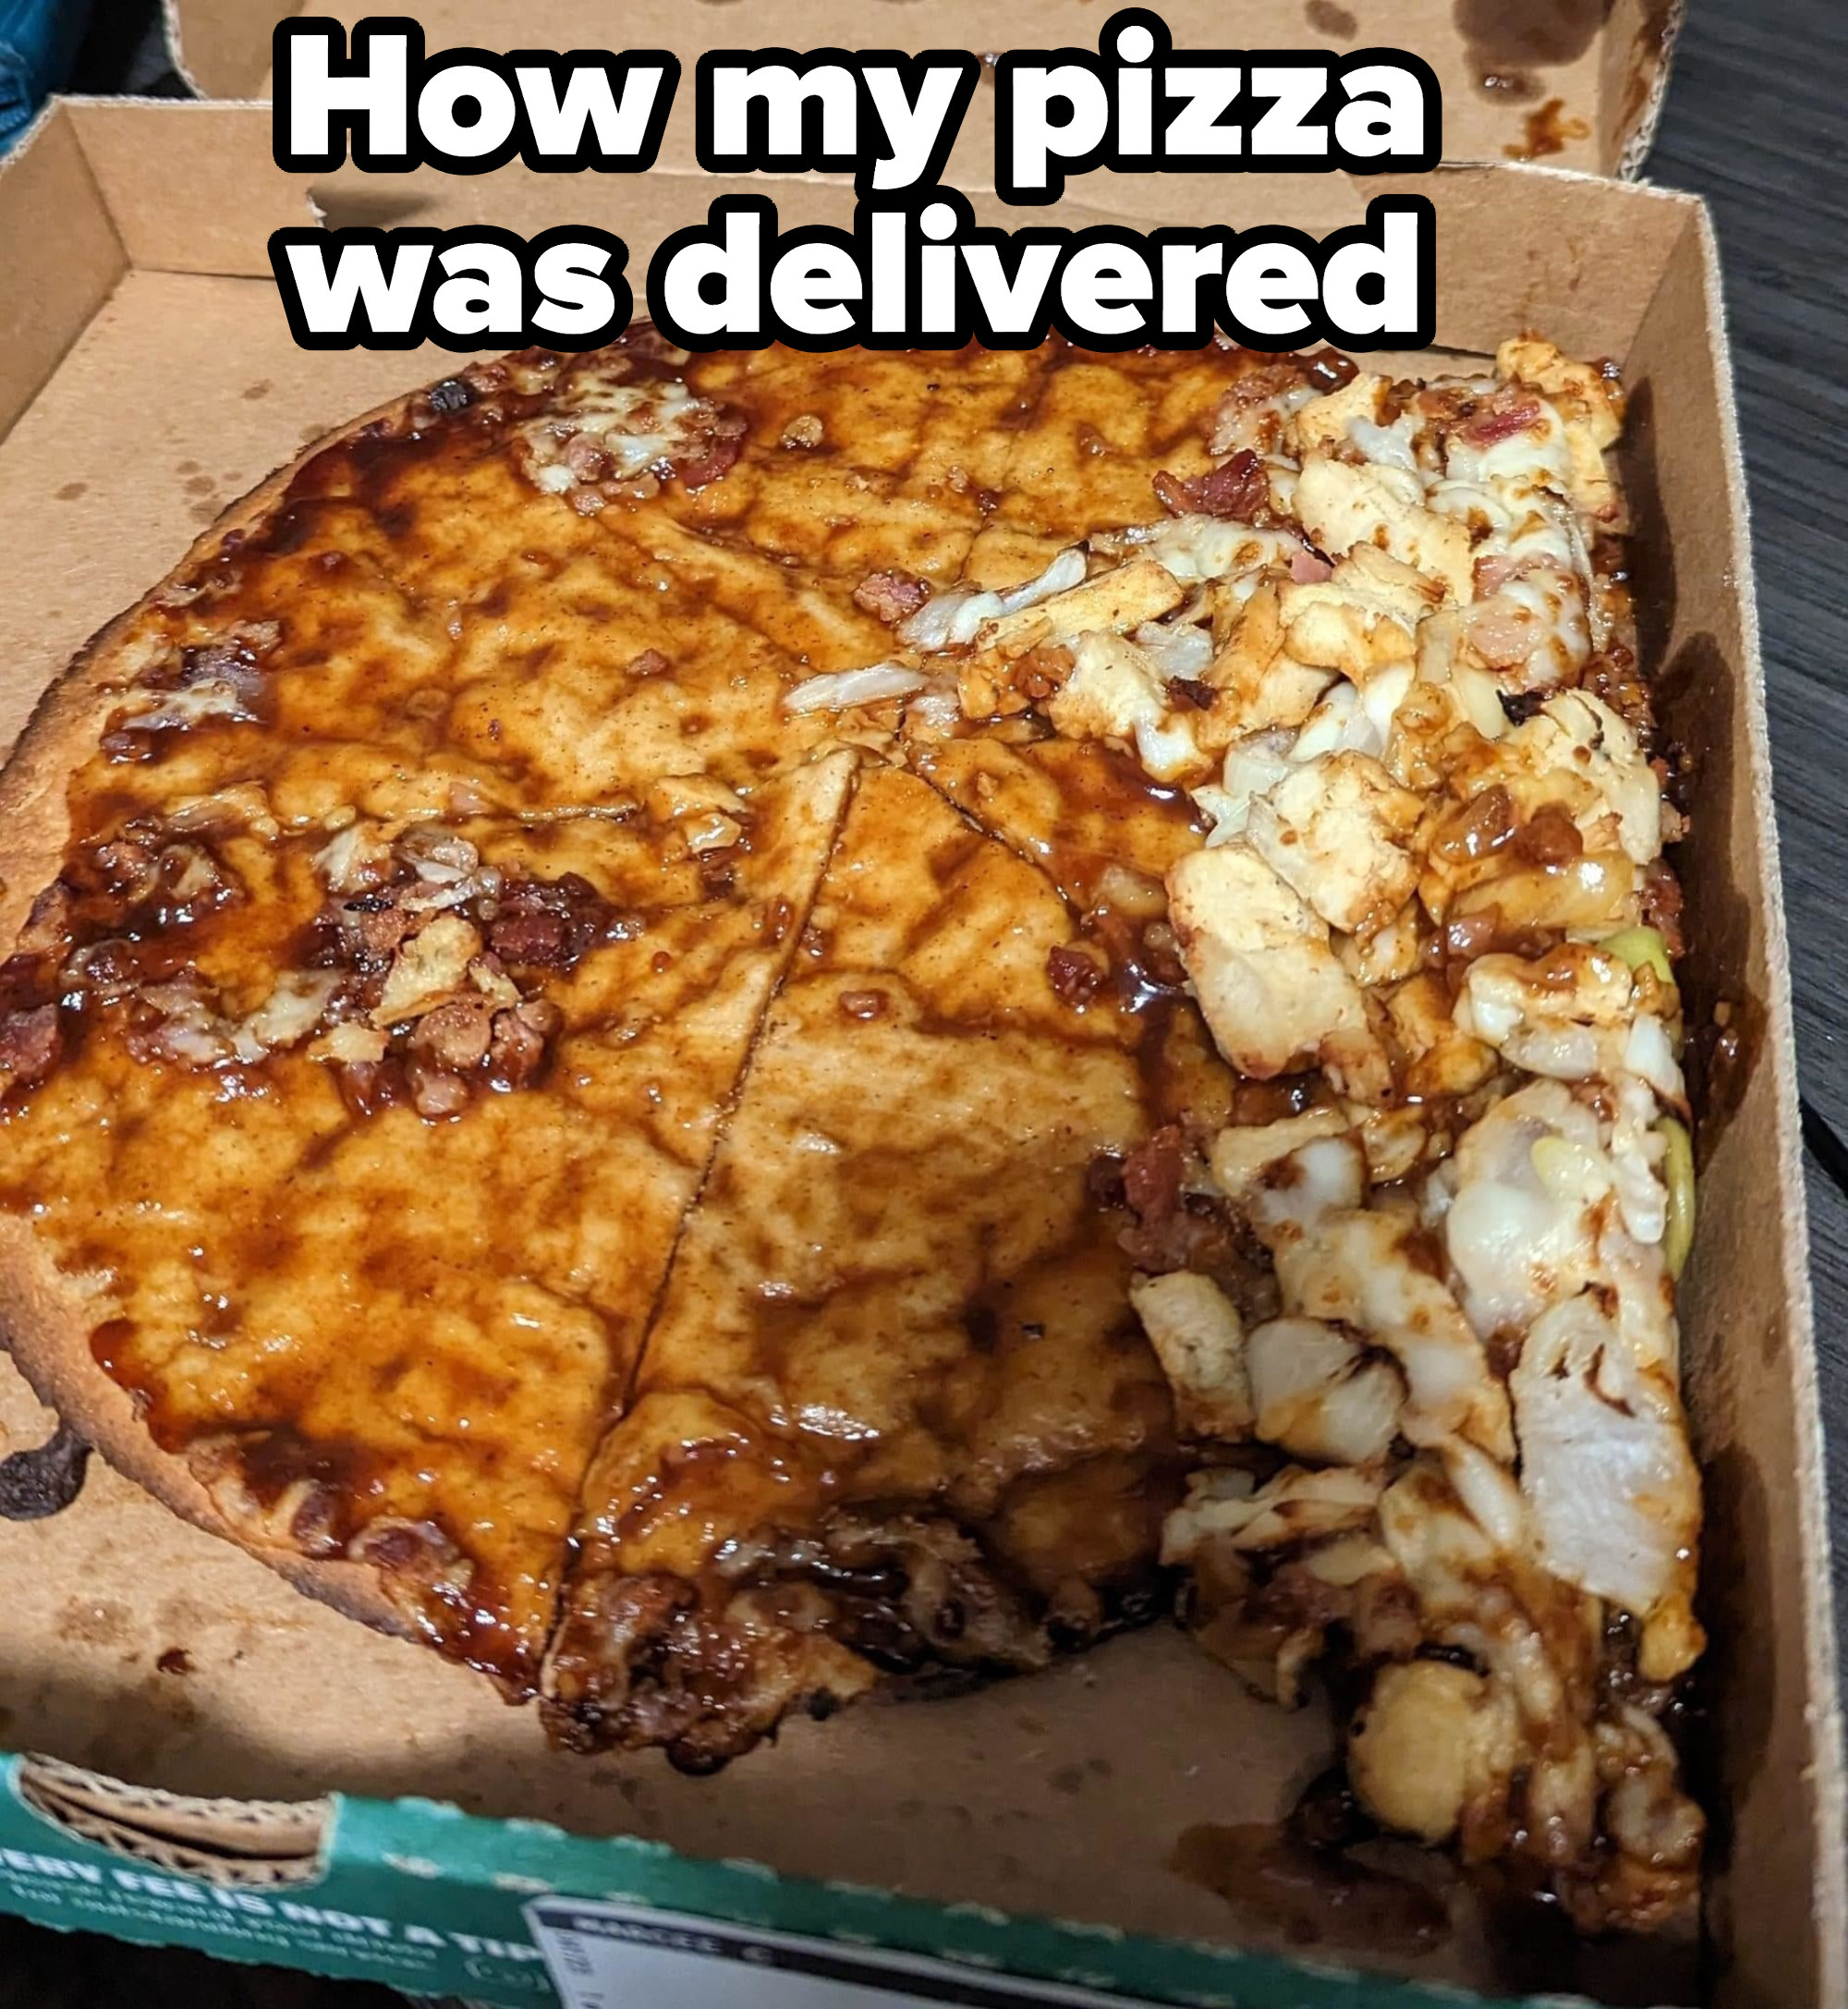 Pizza delivered with all the cheese and toppings off the pie